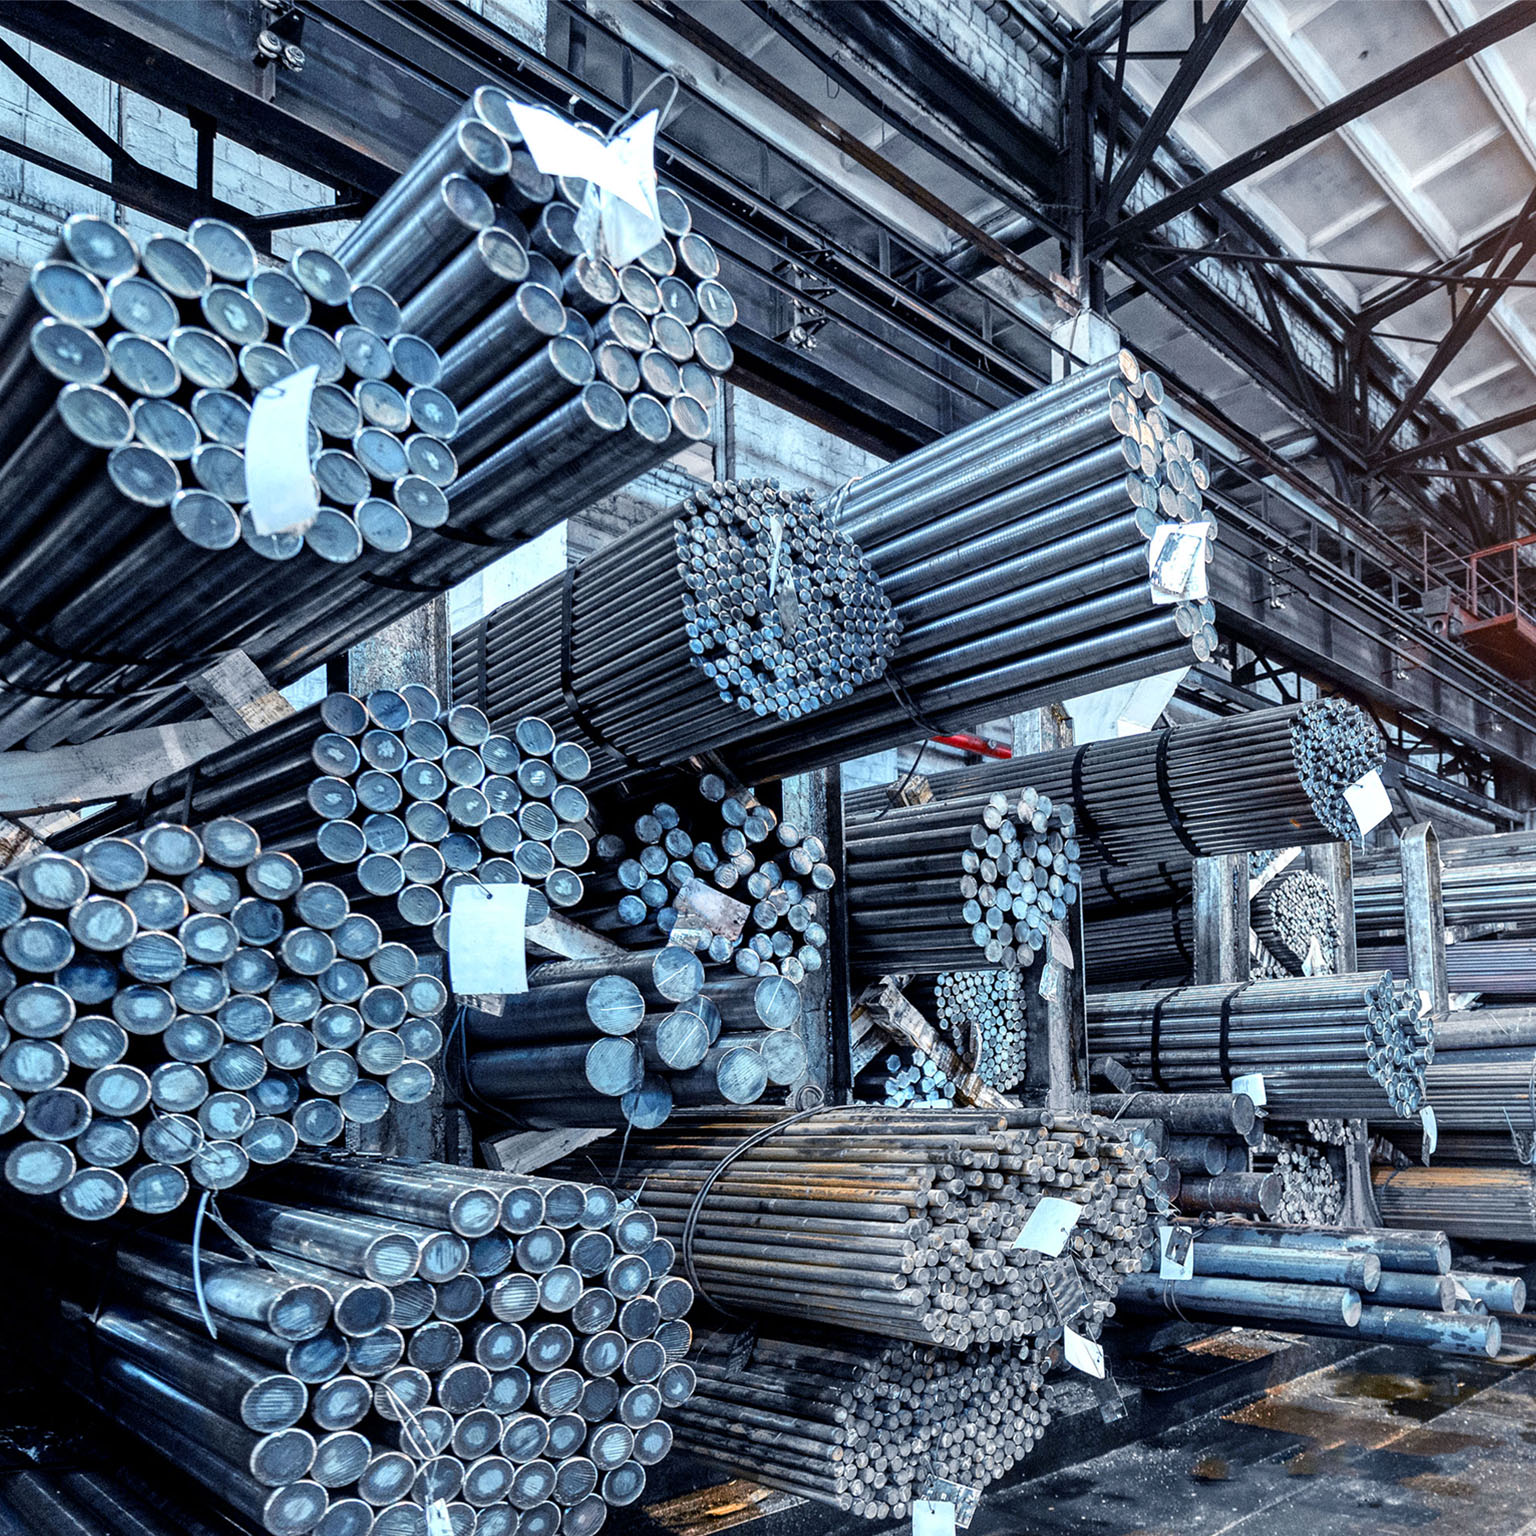 Image of several large bundles of aluminum tubes in a warehouse